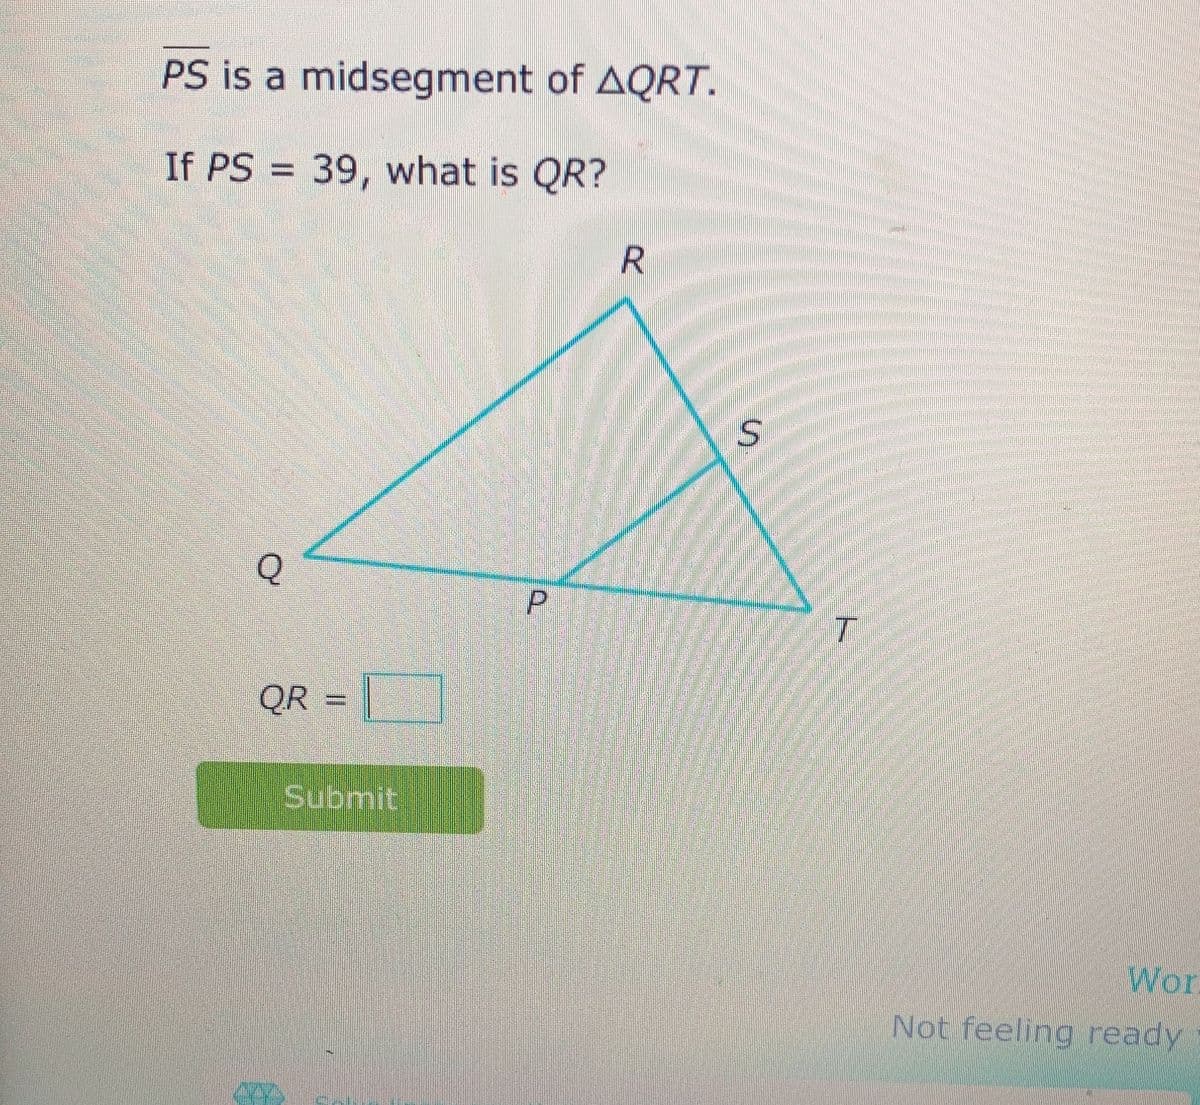 Anton
PS is a midsegment of AQRT.
If PS = 39, what is QR?
Q
QR
Submit
P
R
S
T
Wor
Not feeling ready